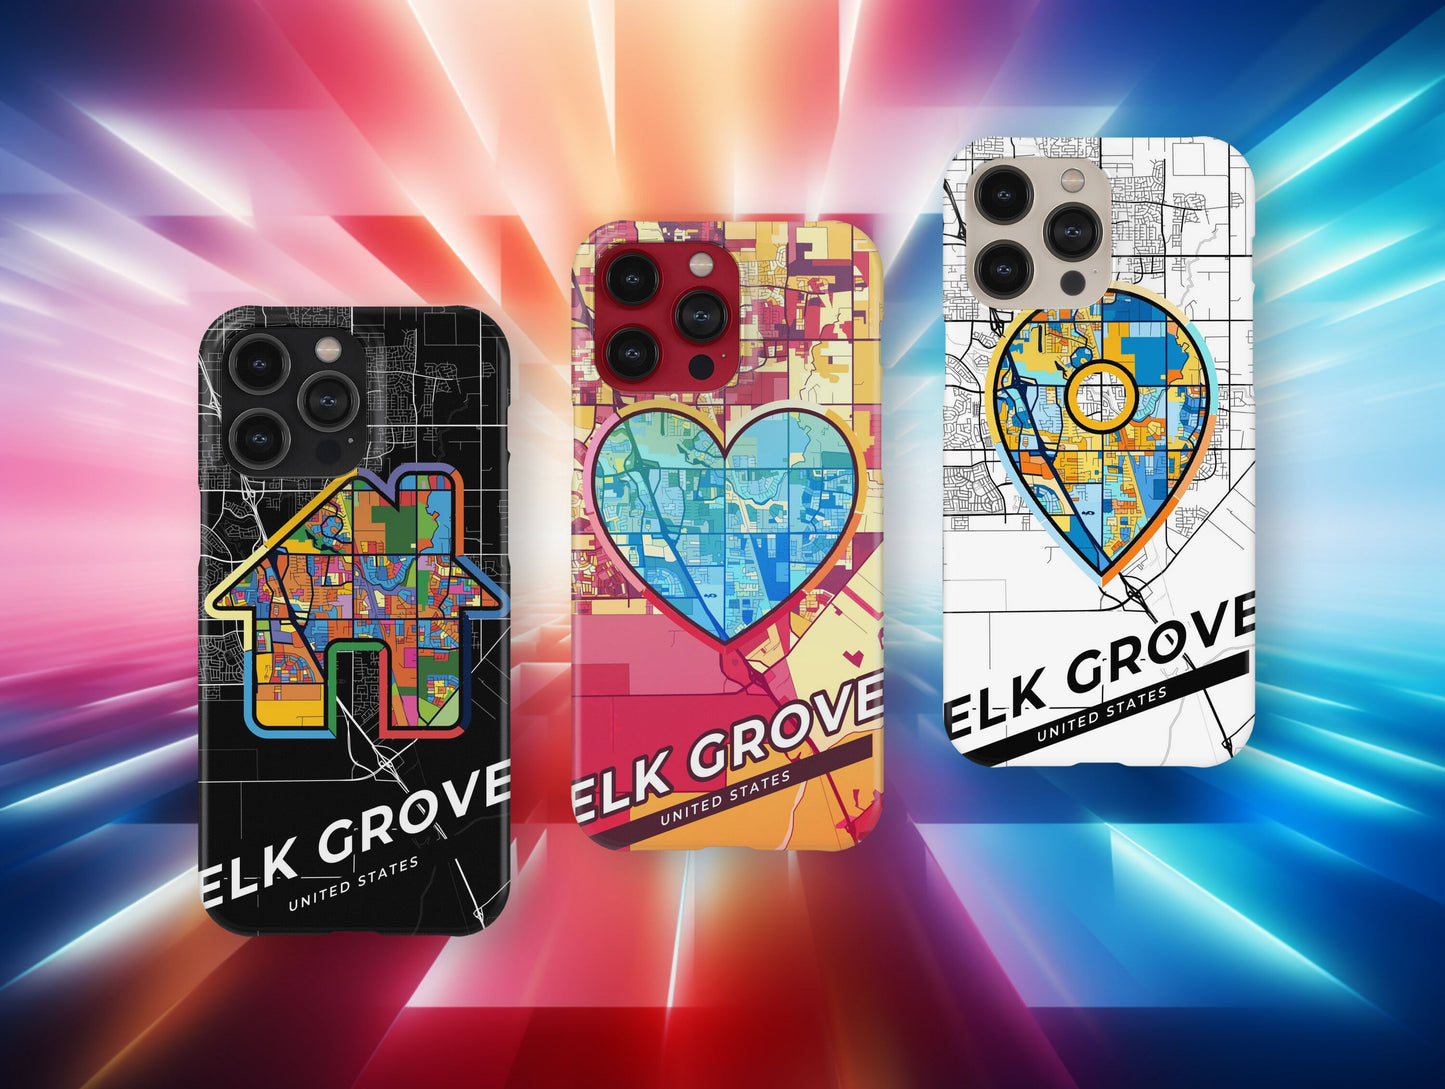 Elk Grove California slim phone case with colorful icon. Birthday, wedding or housewarming gift. Couple match cases.